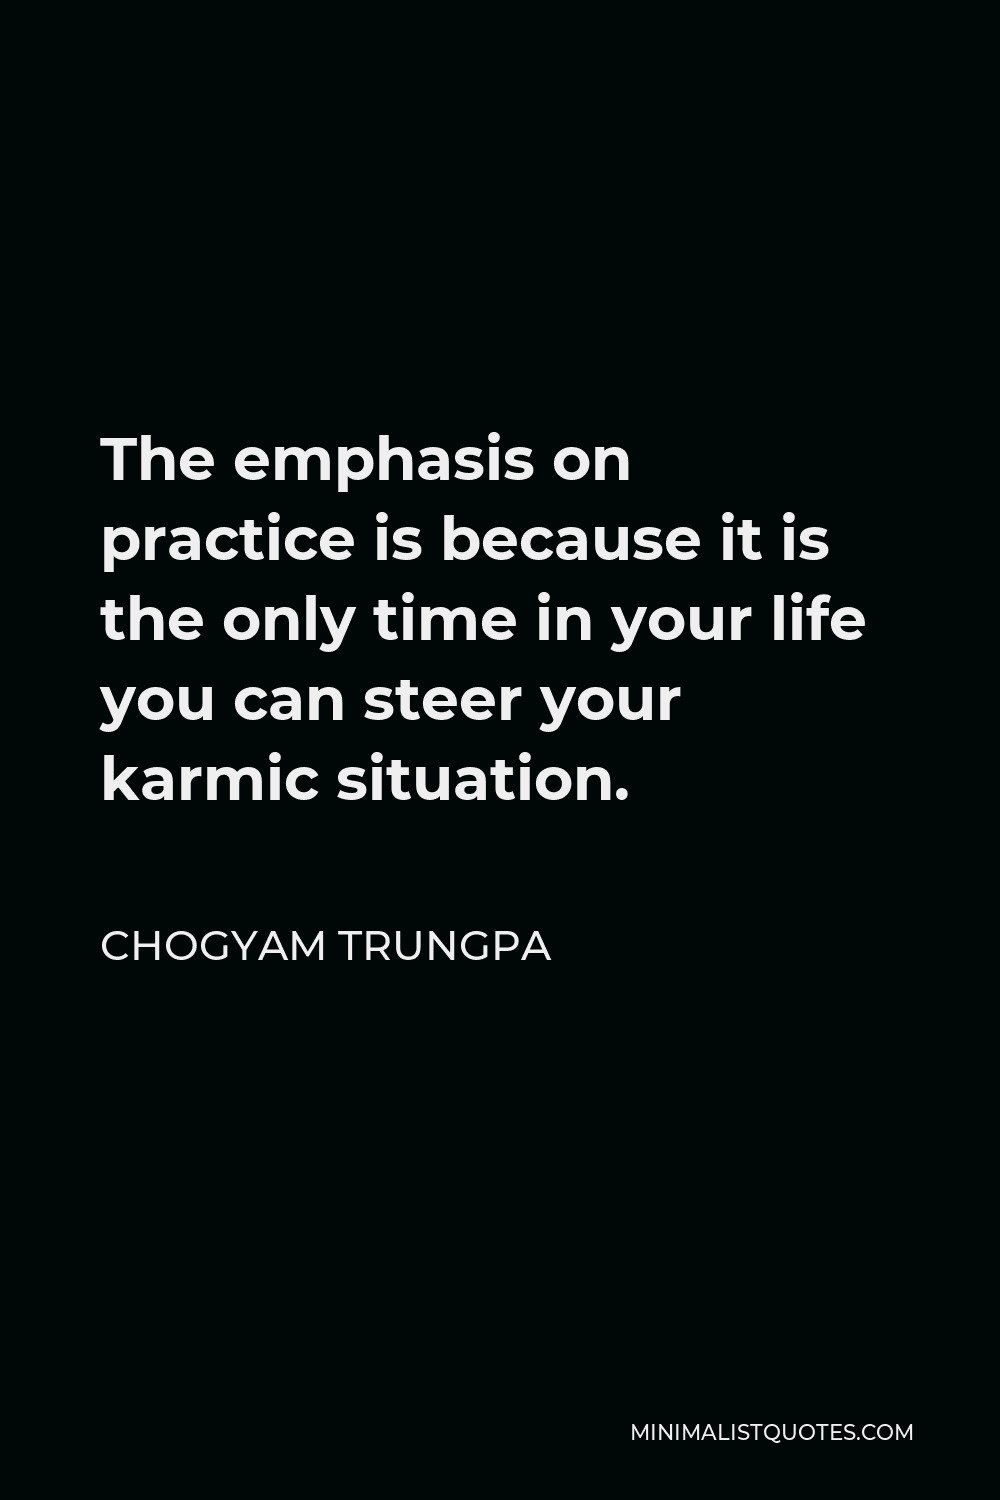 Chogyam Trungpa Quote - The emphasis on practice is because it is the only time in your life you can steer your karmic situation.